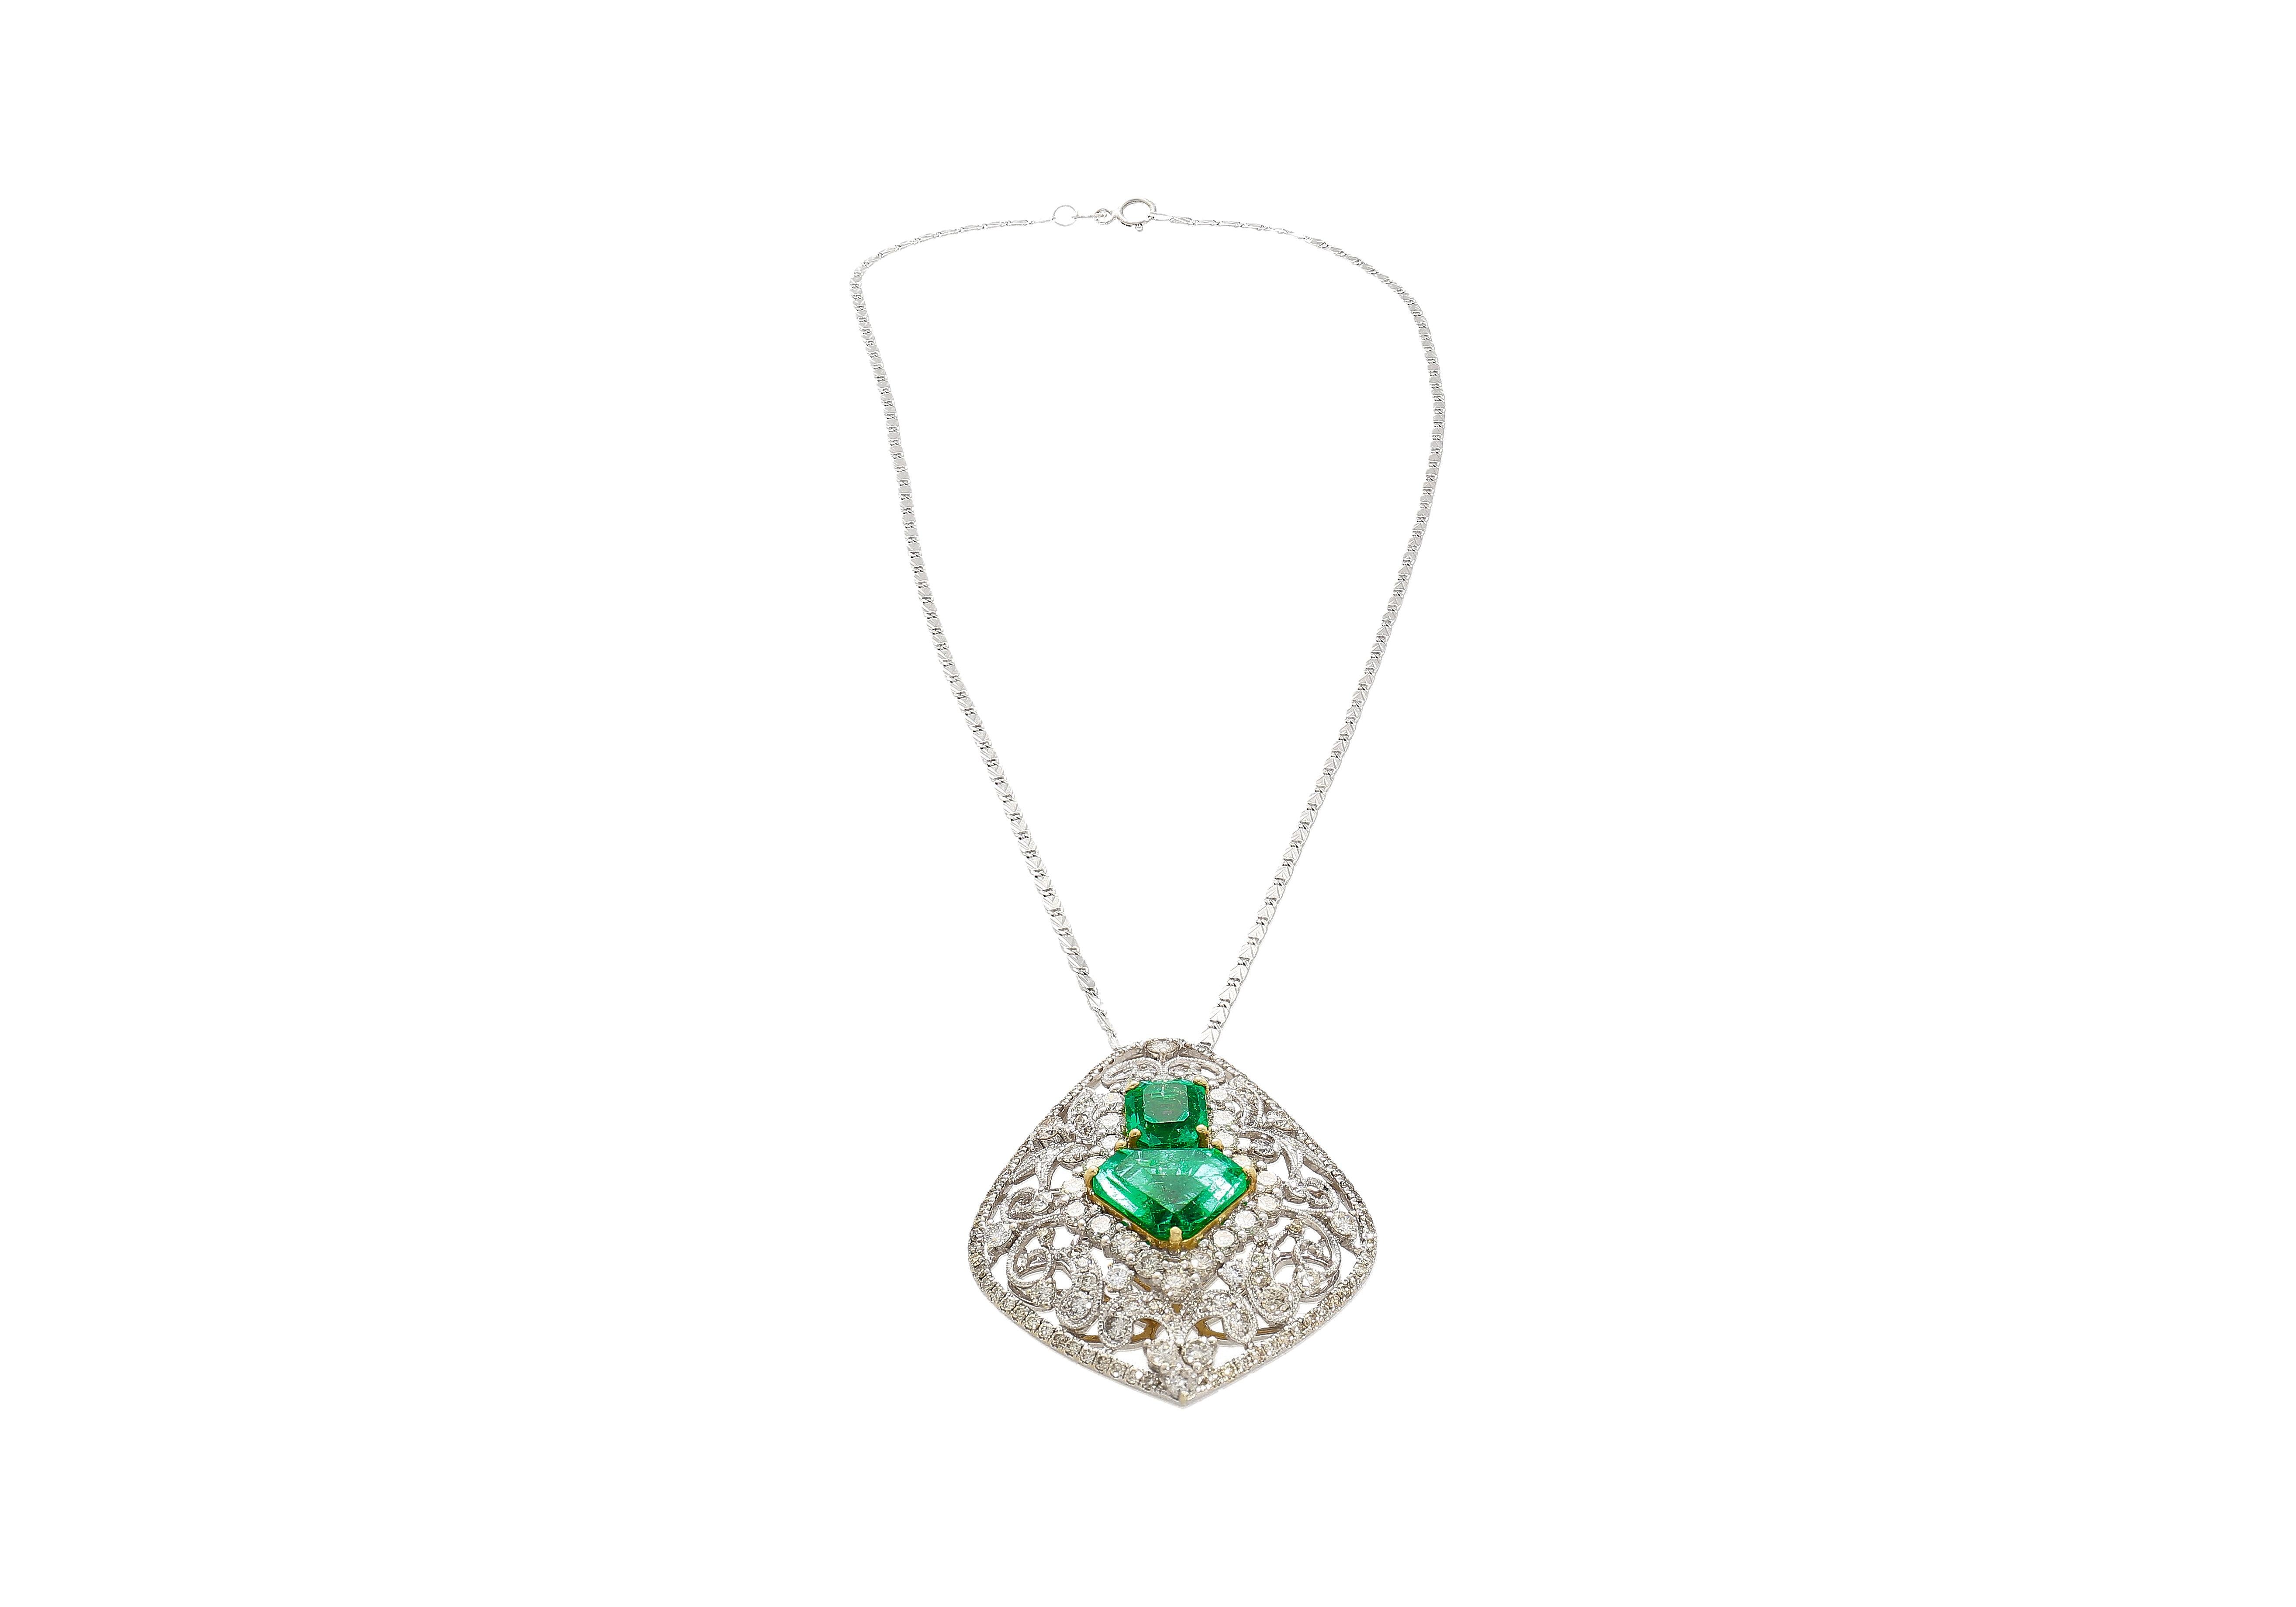 Vintage Carved 18K White Gold Pendant Necklace With Shield Cut Emeralds In New Condition For Sale In Miami, FL